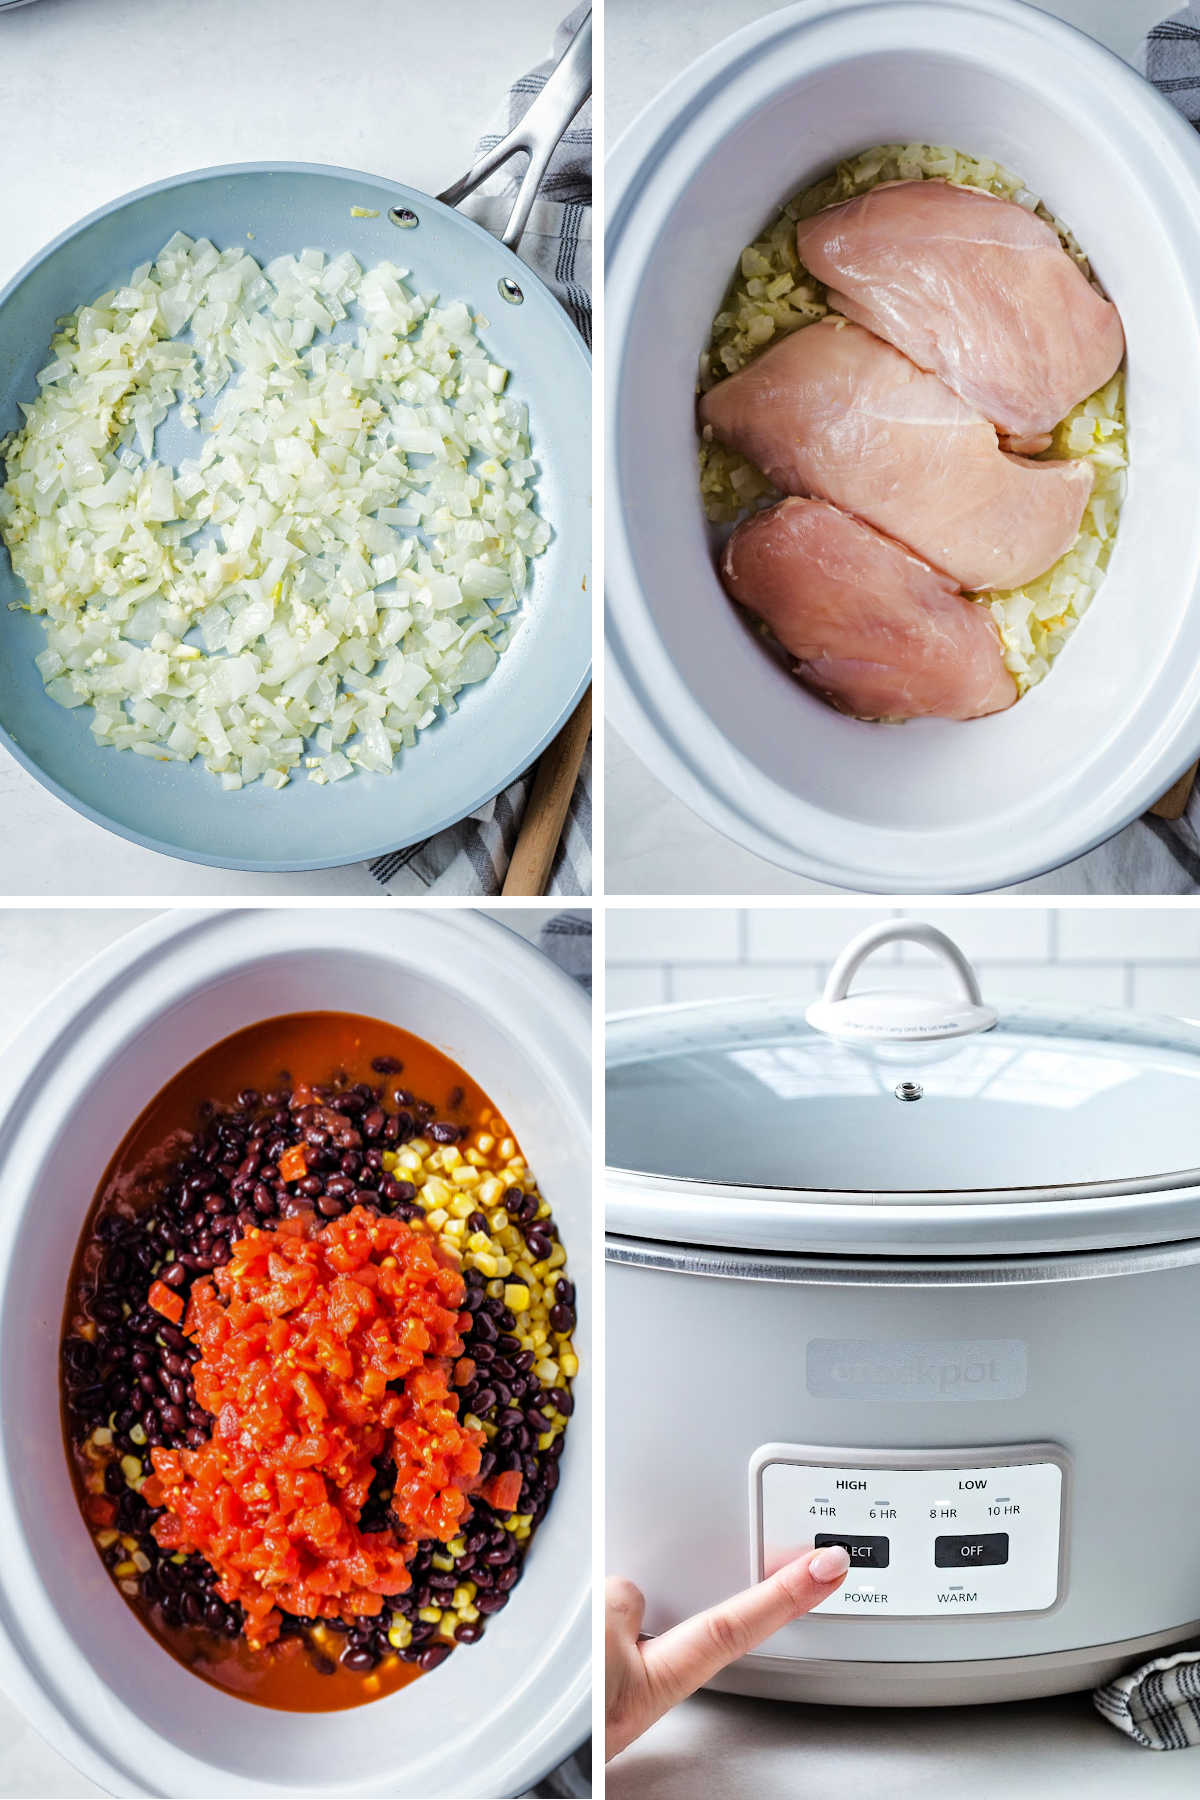 process steps for making slow cooker chicken enchilada soup: saute onions and garlic; place onions and chicken breast in slow cooker; add other ingredients; set cook time.